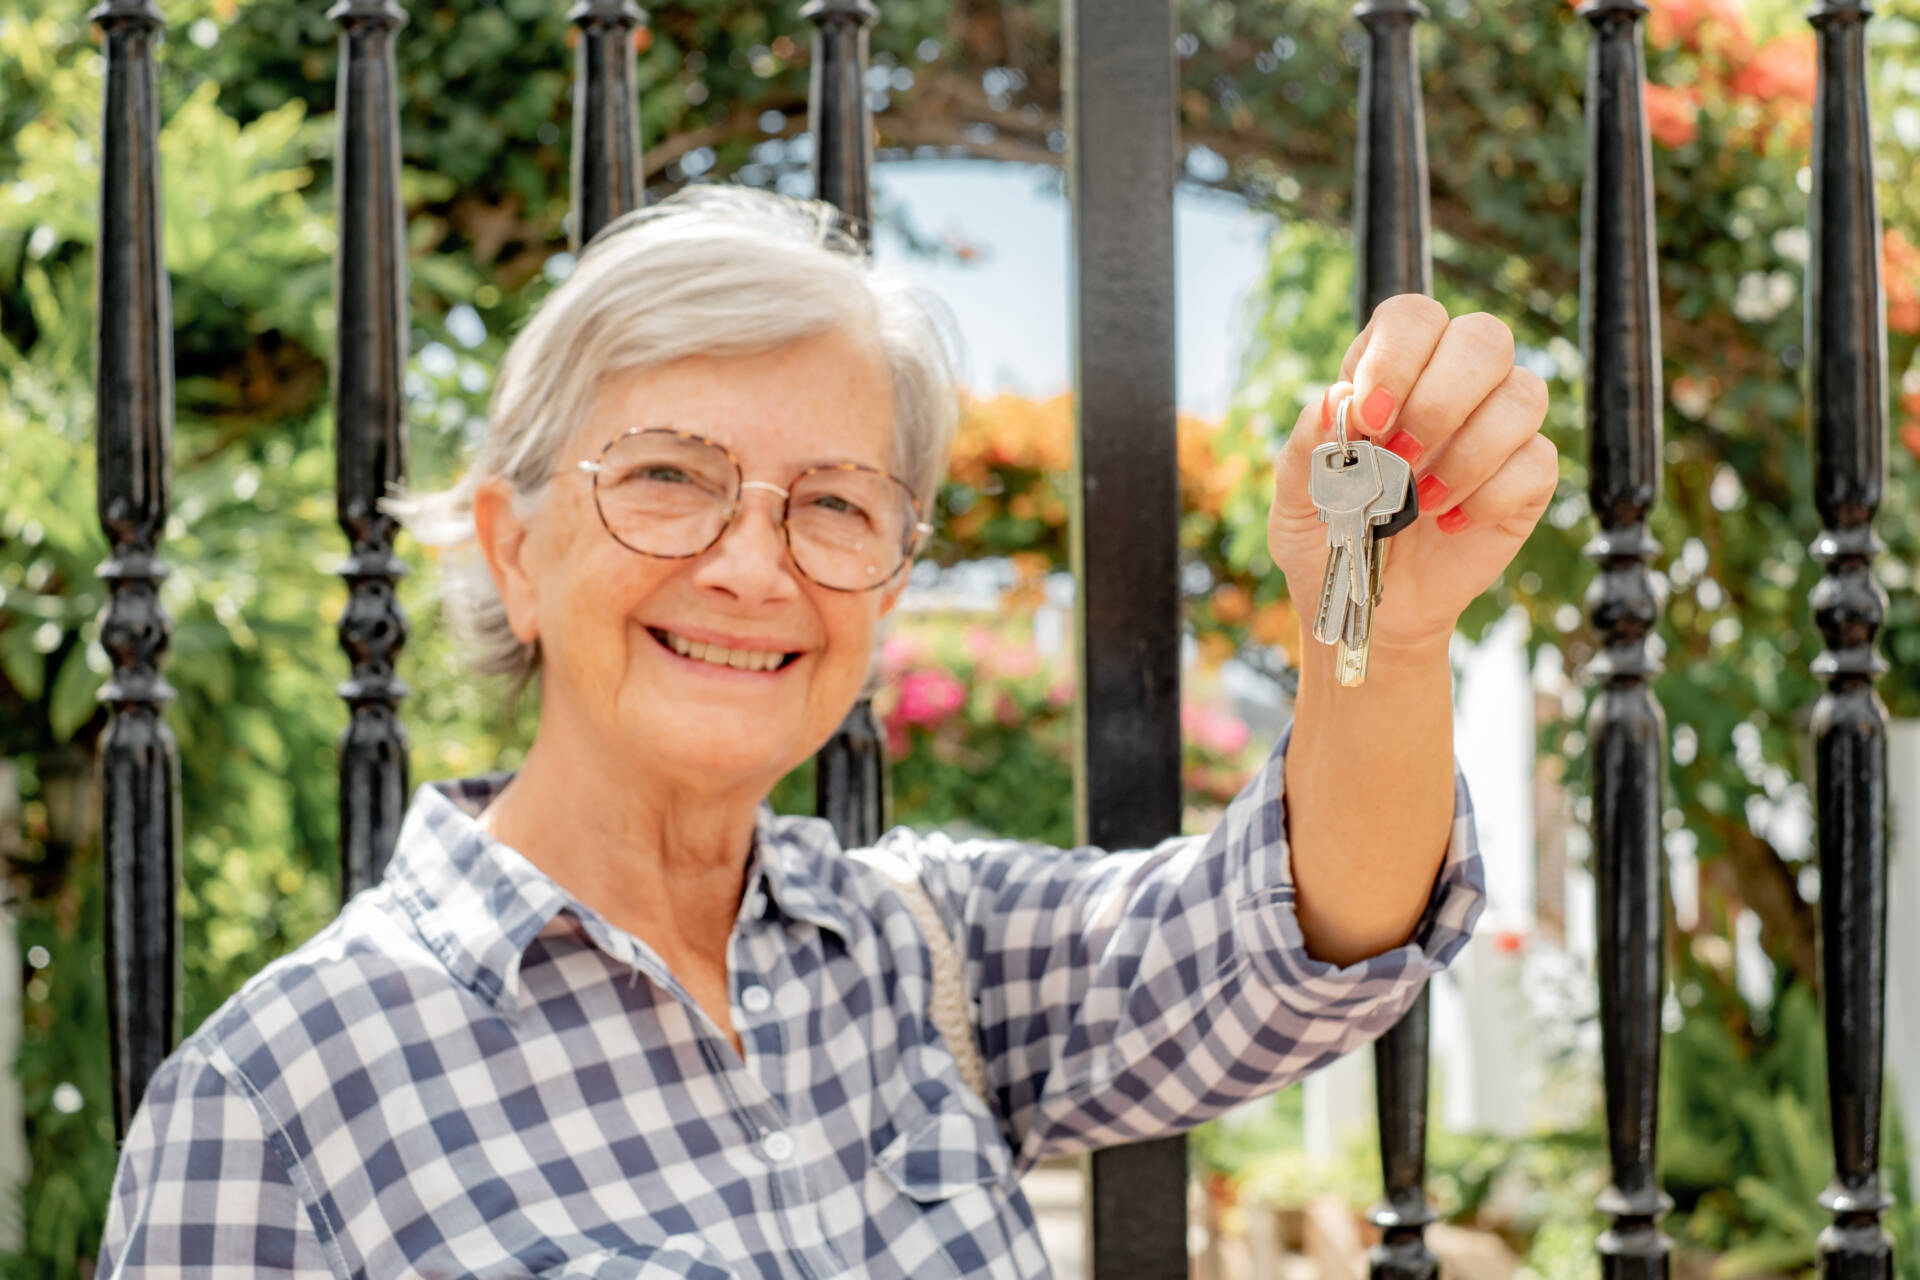 Blurred smiling senior woman at gate holding keys to new home, r